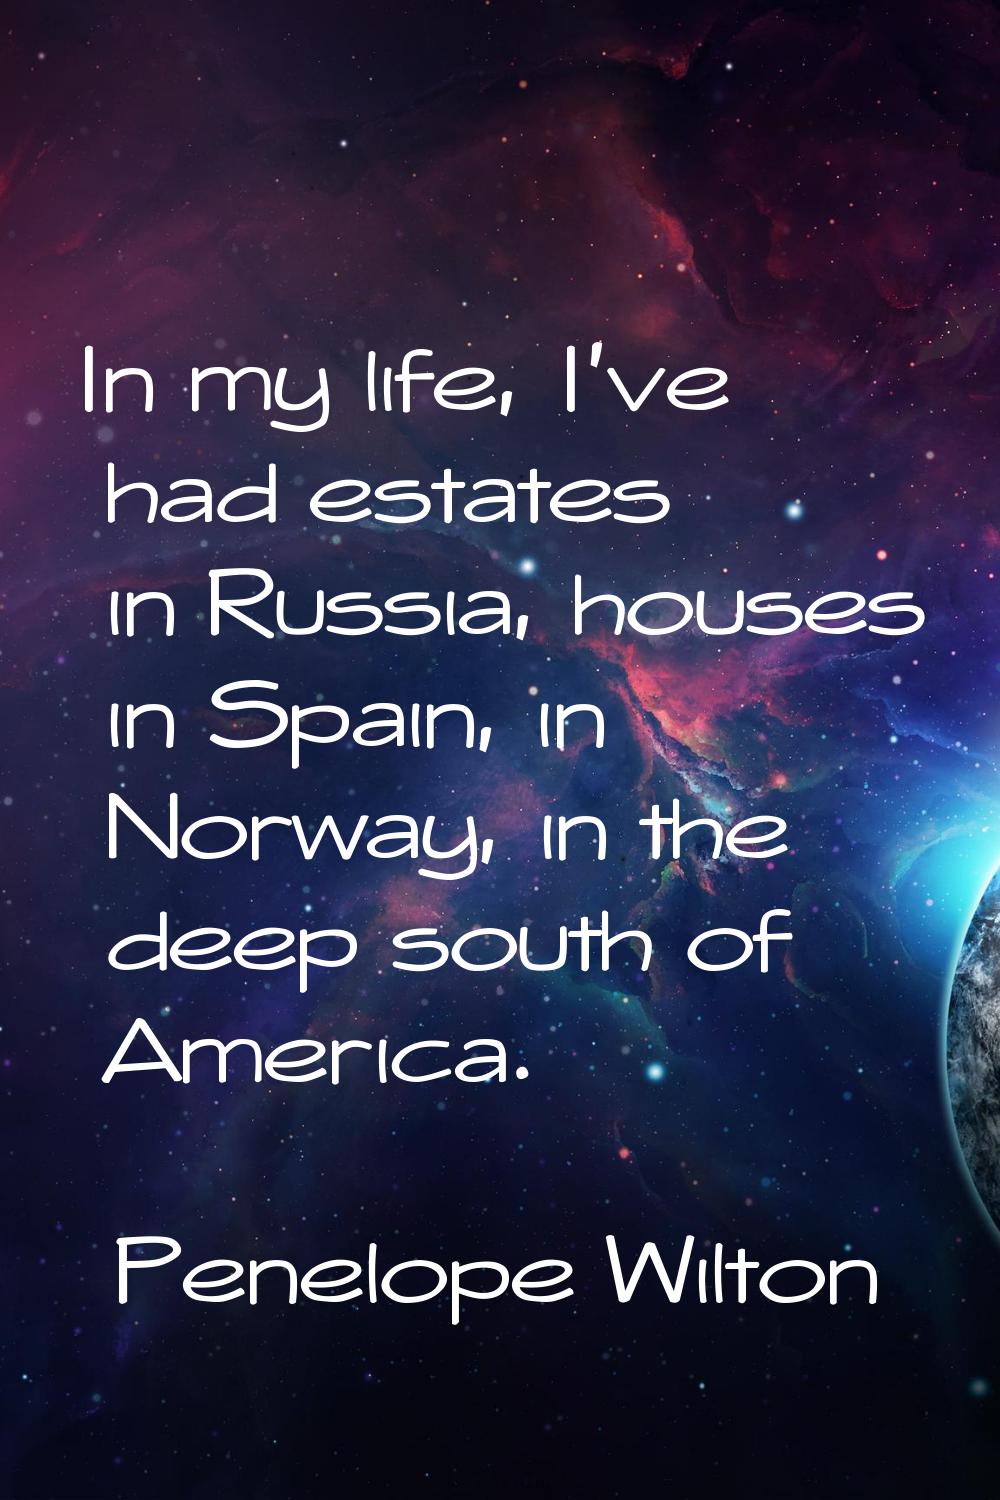 In my life, I've had estates in Russia, houses in Spain, in Norway, in the deep south of America.